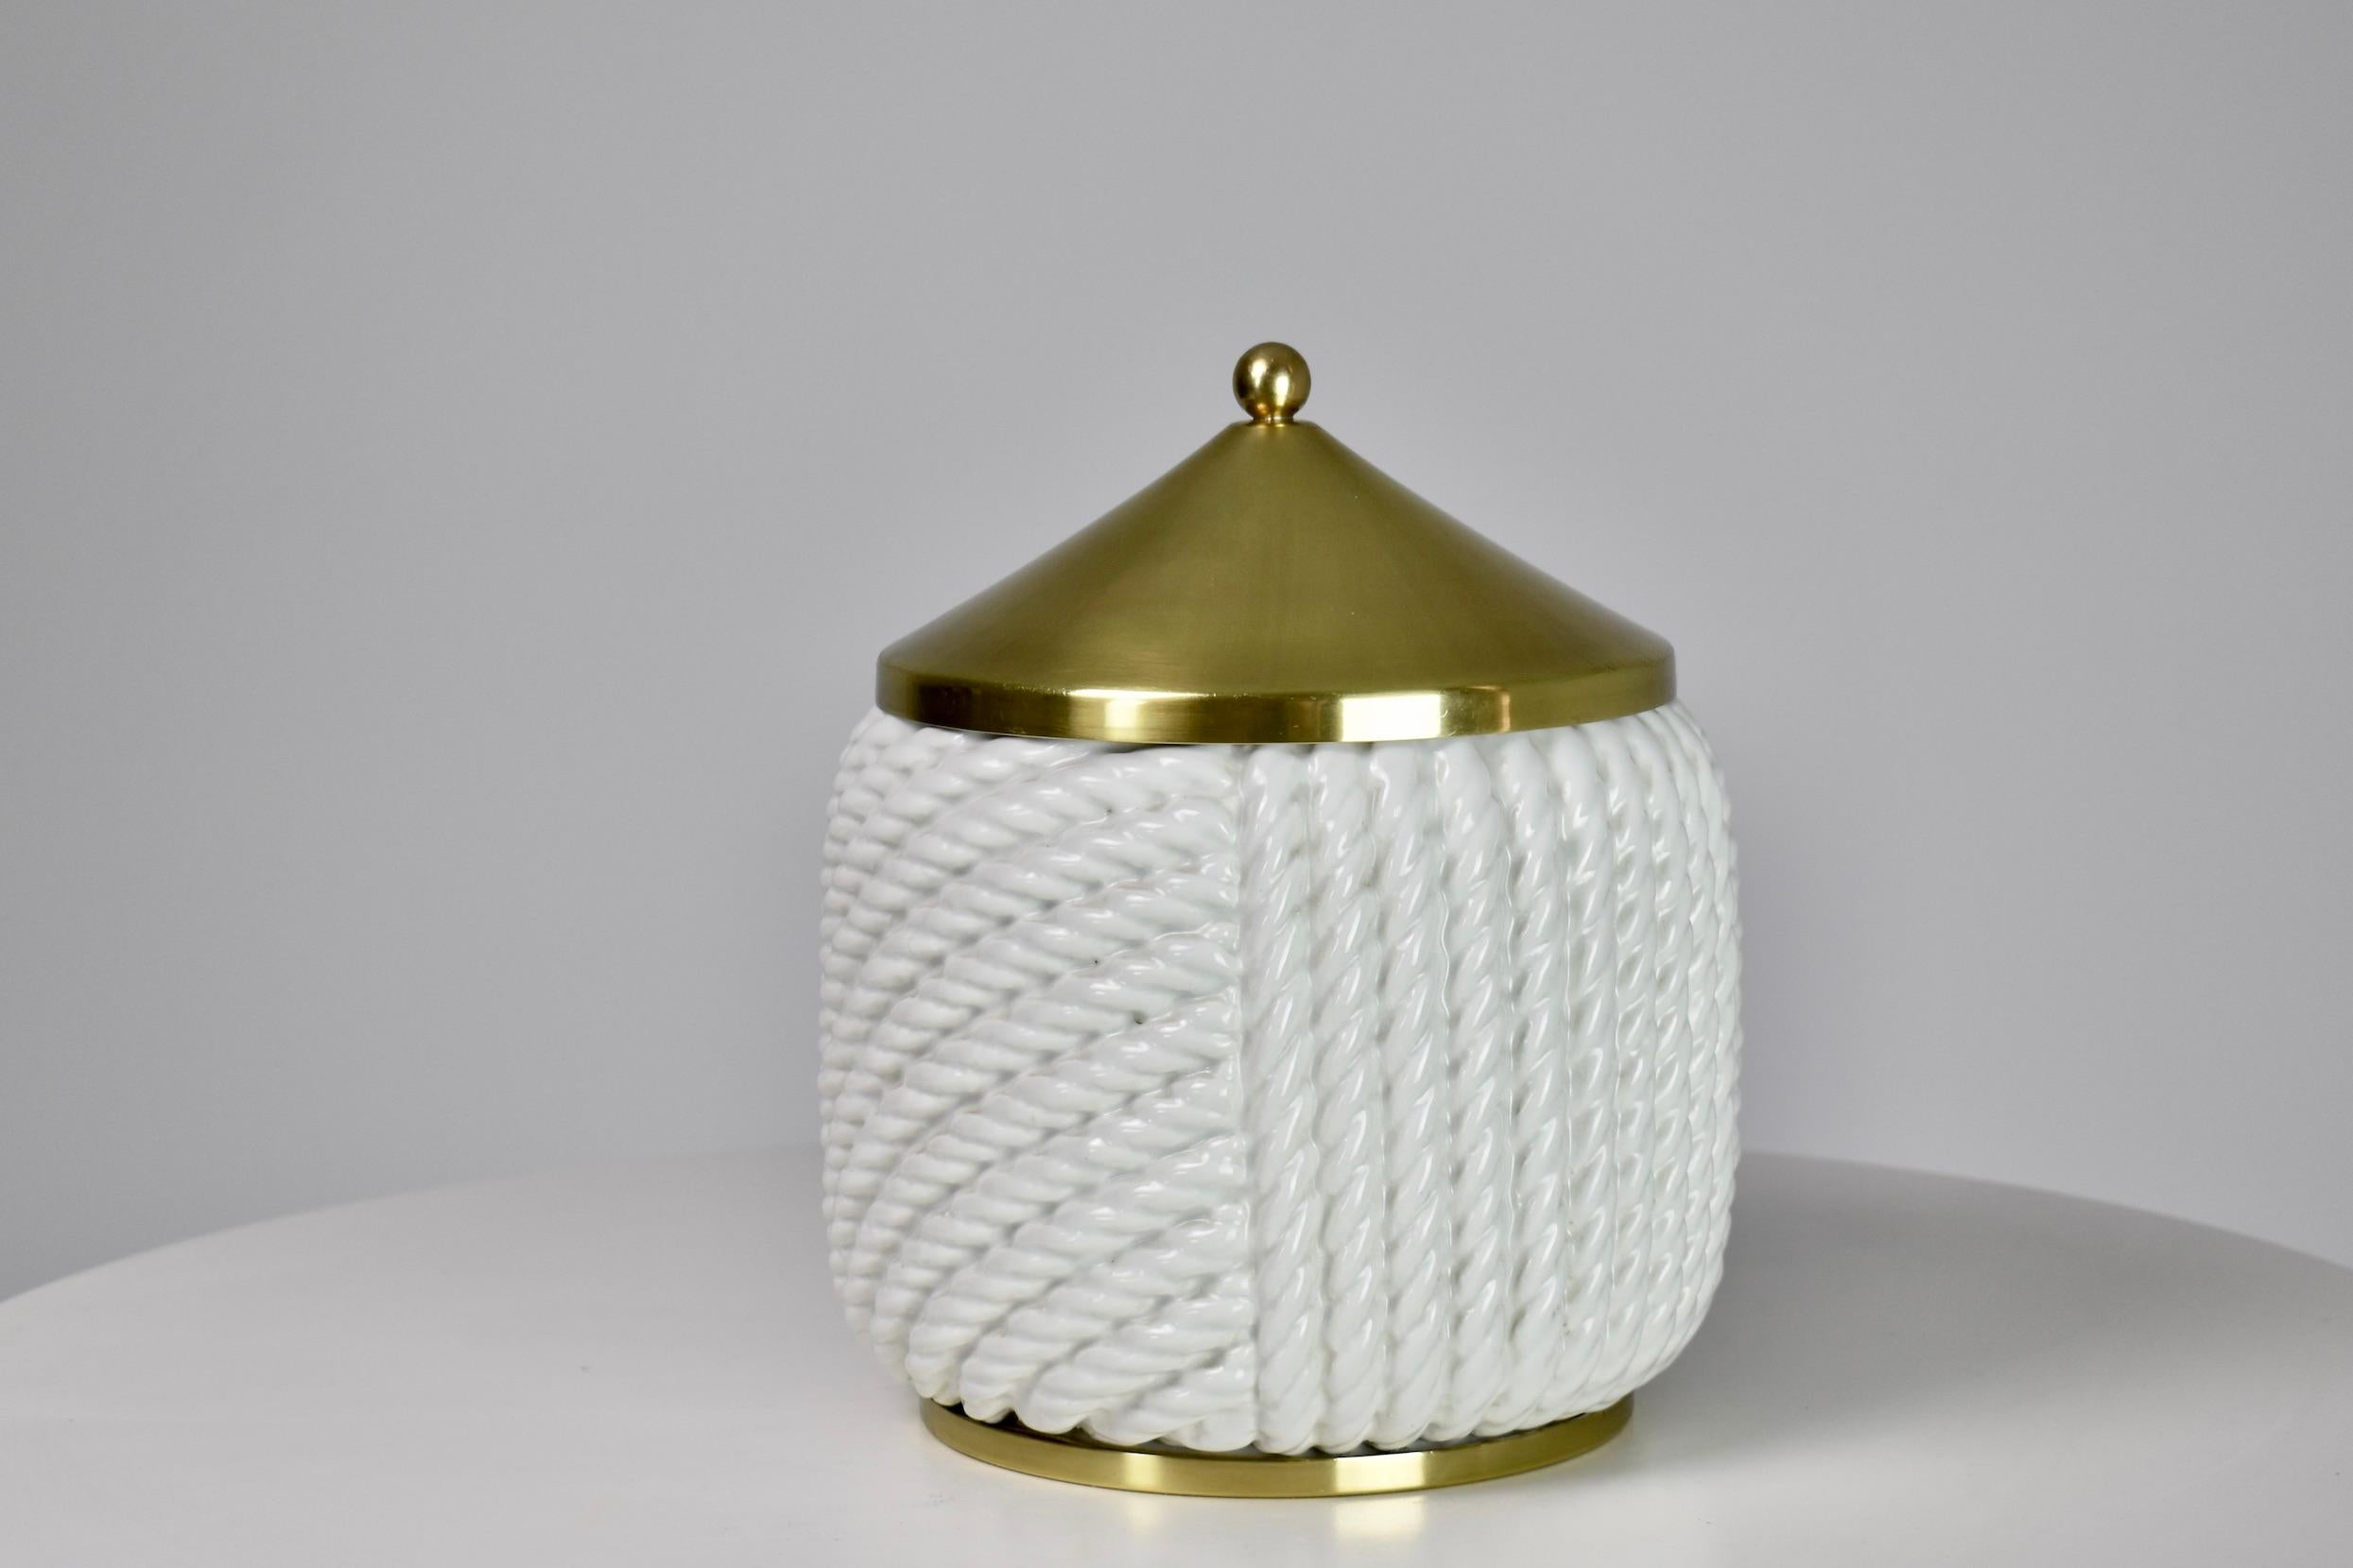 Rare 1970's Italian ice bucket by Tommaso Barbi composed of a white braided textured ceramic shell and solid gold polished brass lid and rim. 
Italy. Circa 1970's
Rare edition 

-----

We are an exhibition space and an online destination